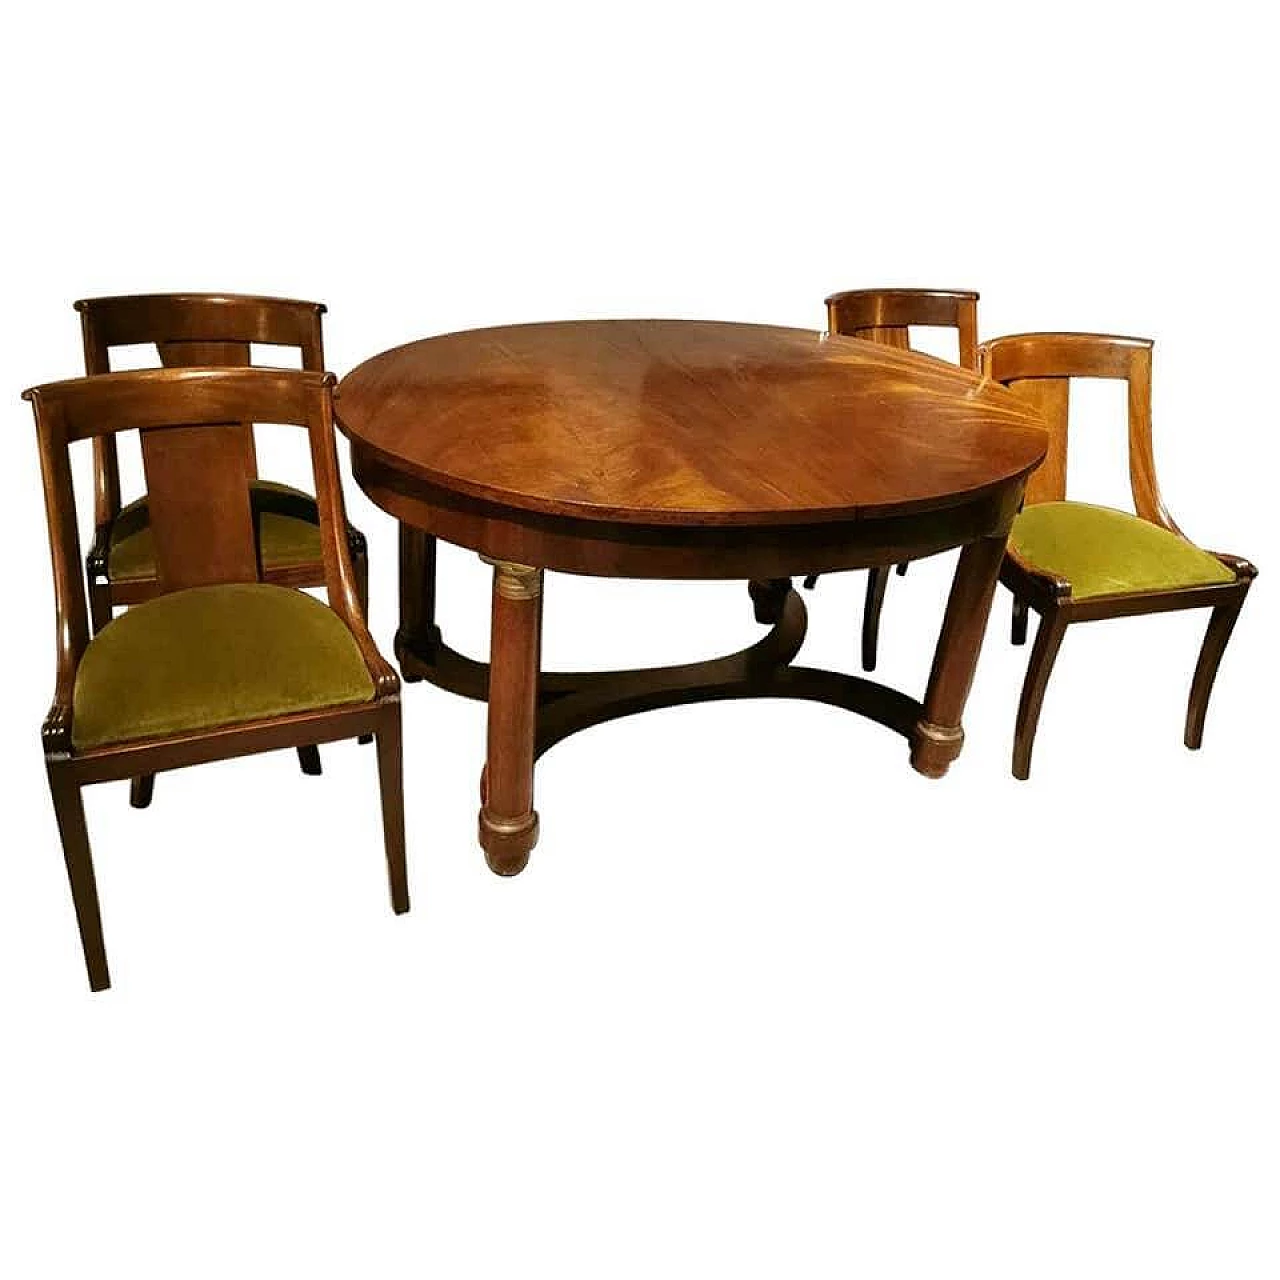 Empire style extendable french table in mahogany feather and 4 chairs, 19th century 1184200